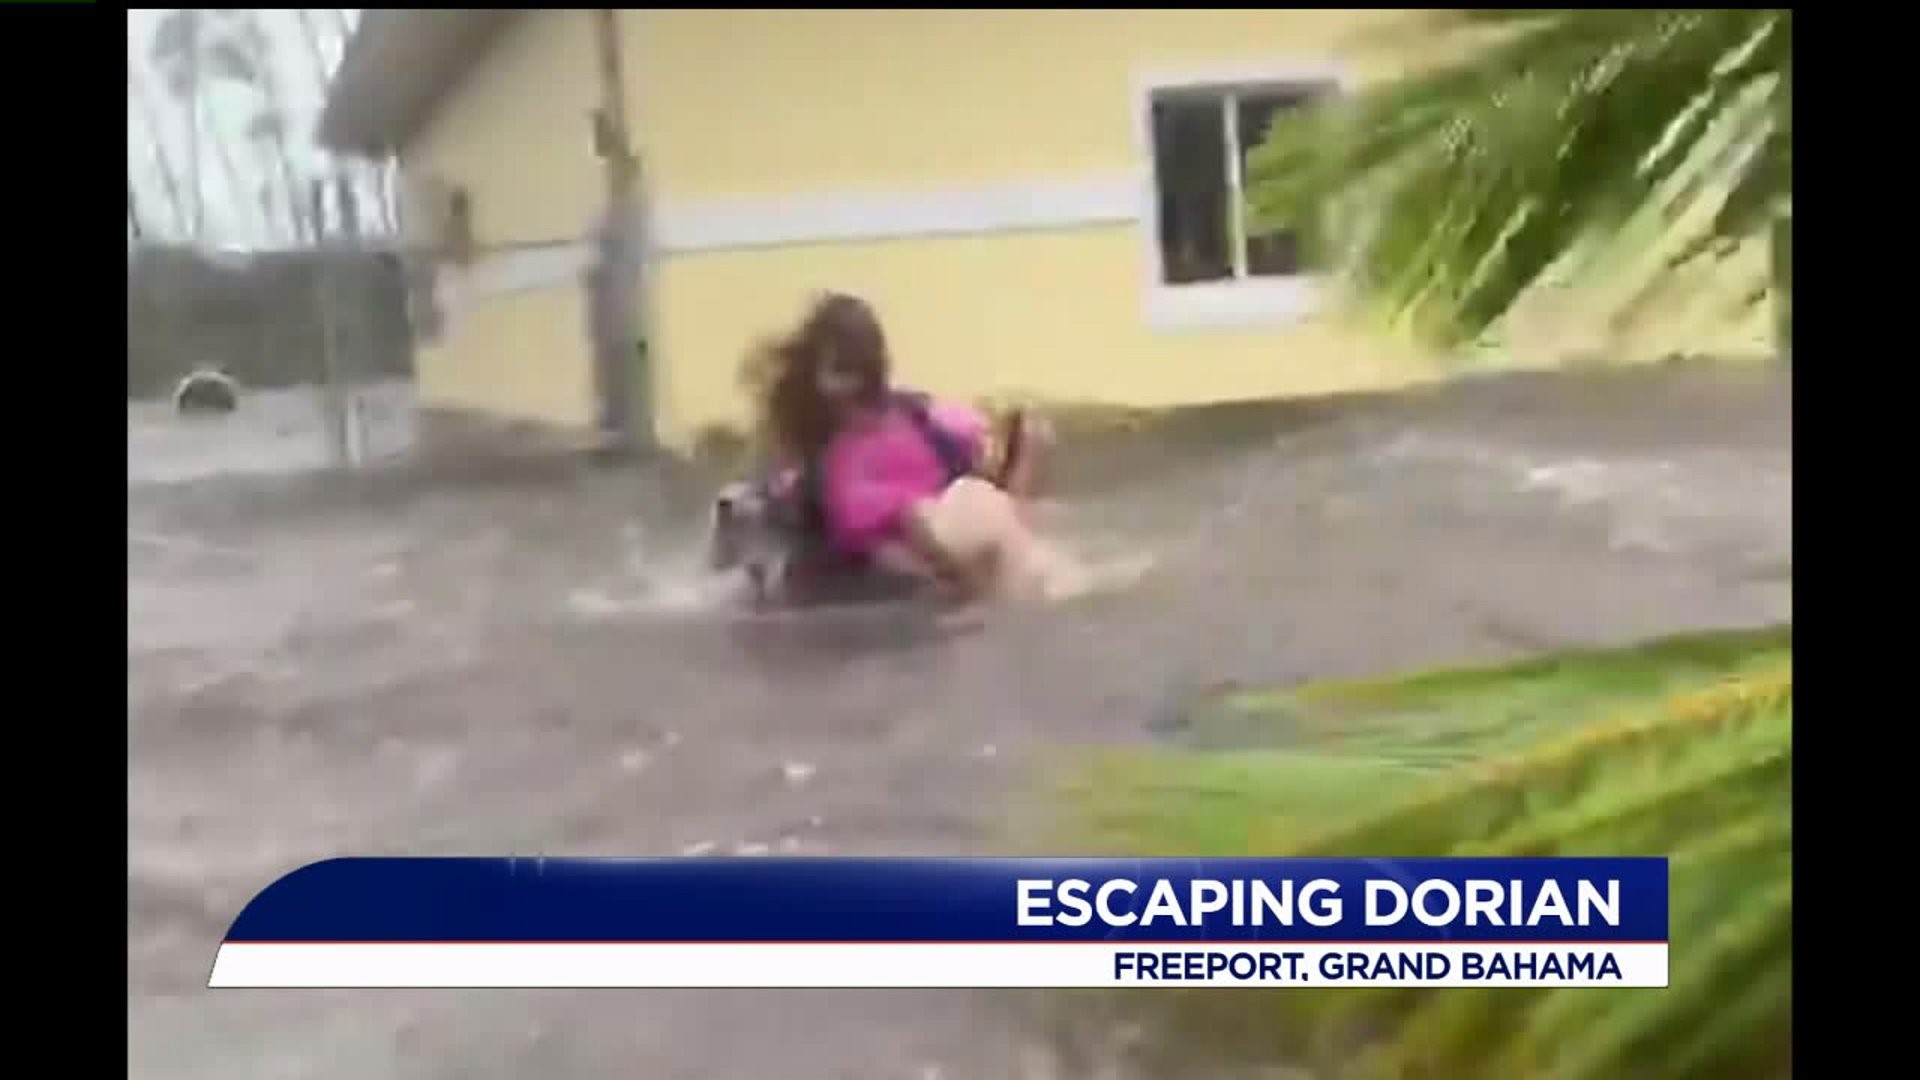 High winds and chest-high water during Hurricane Dorian